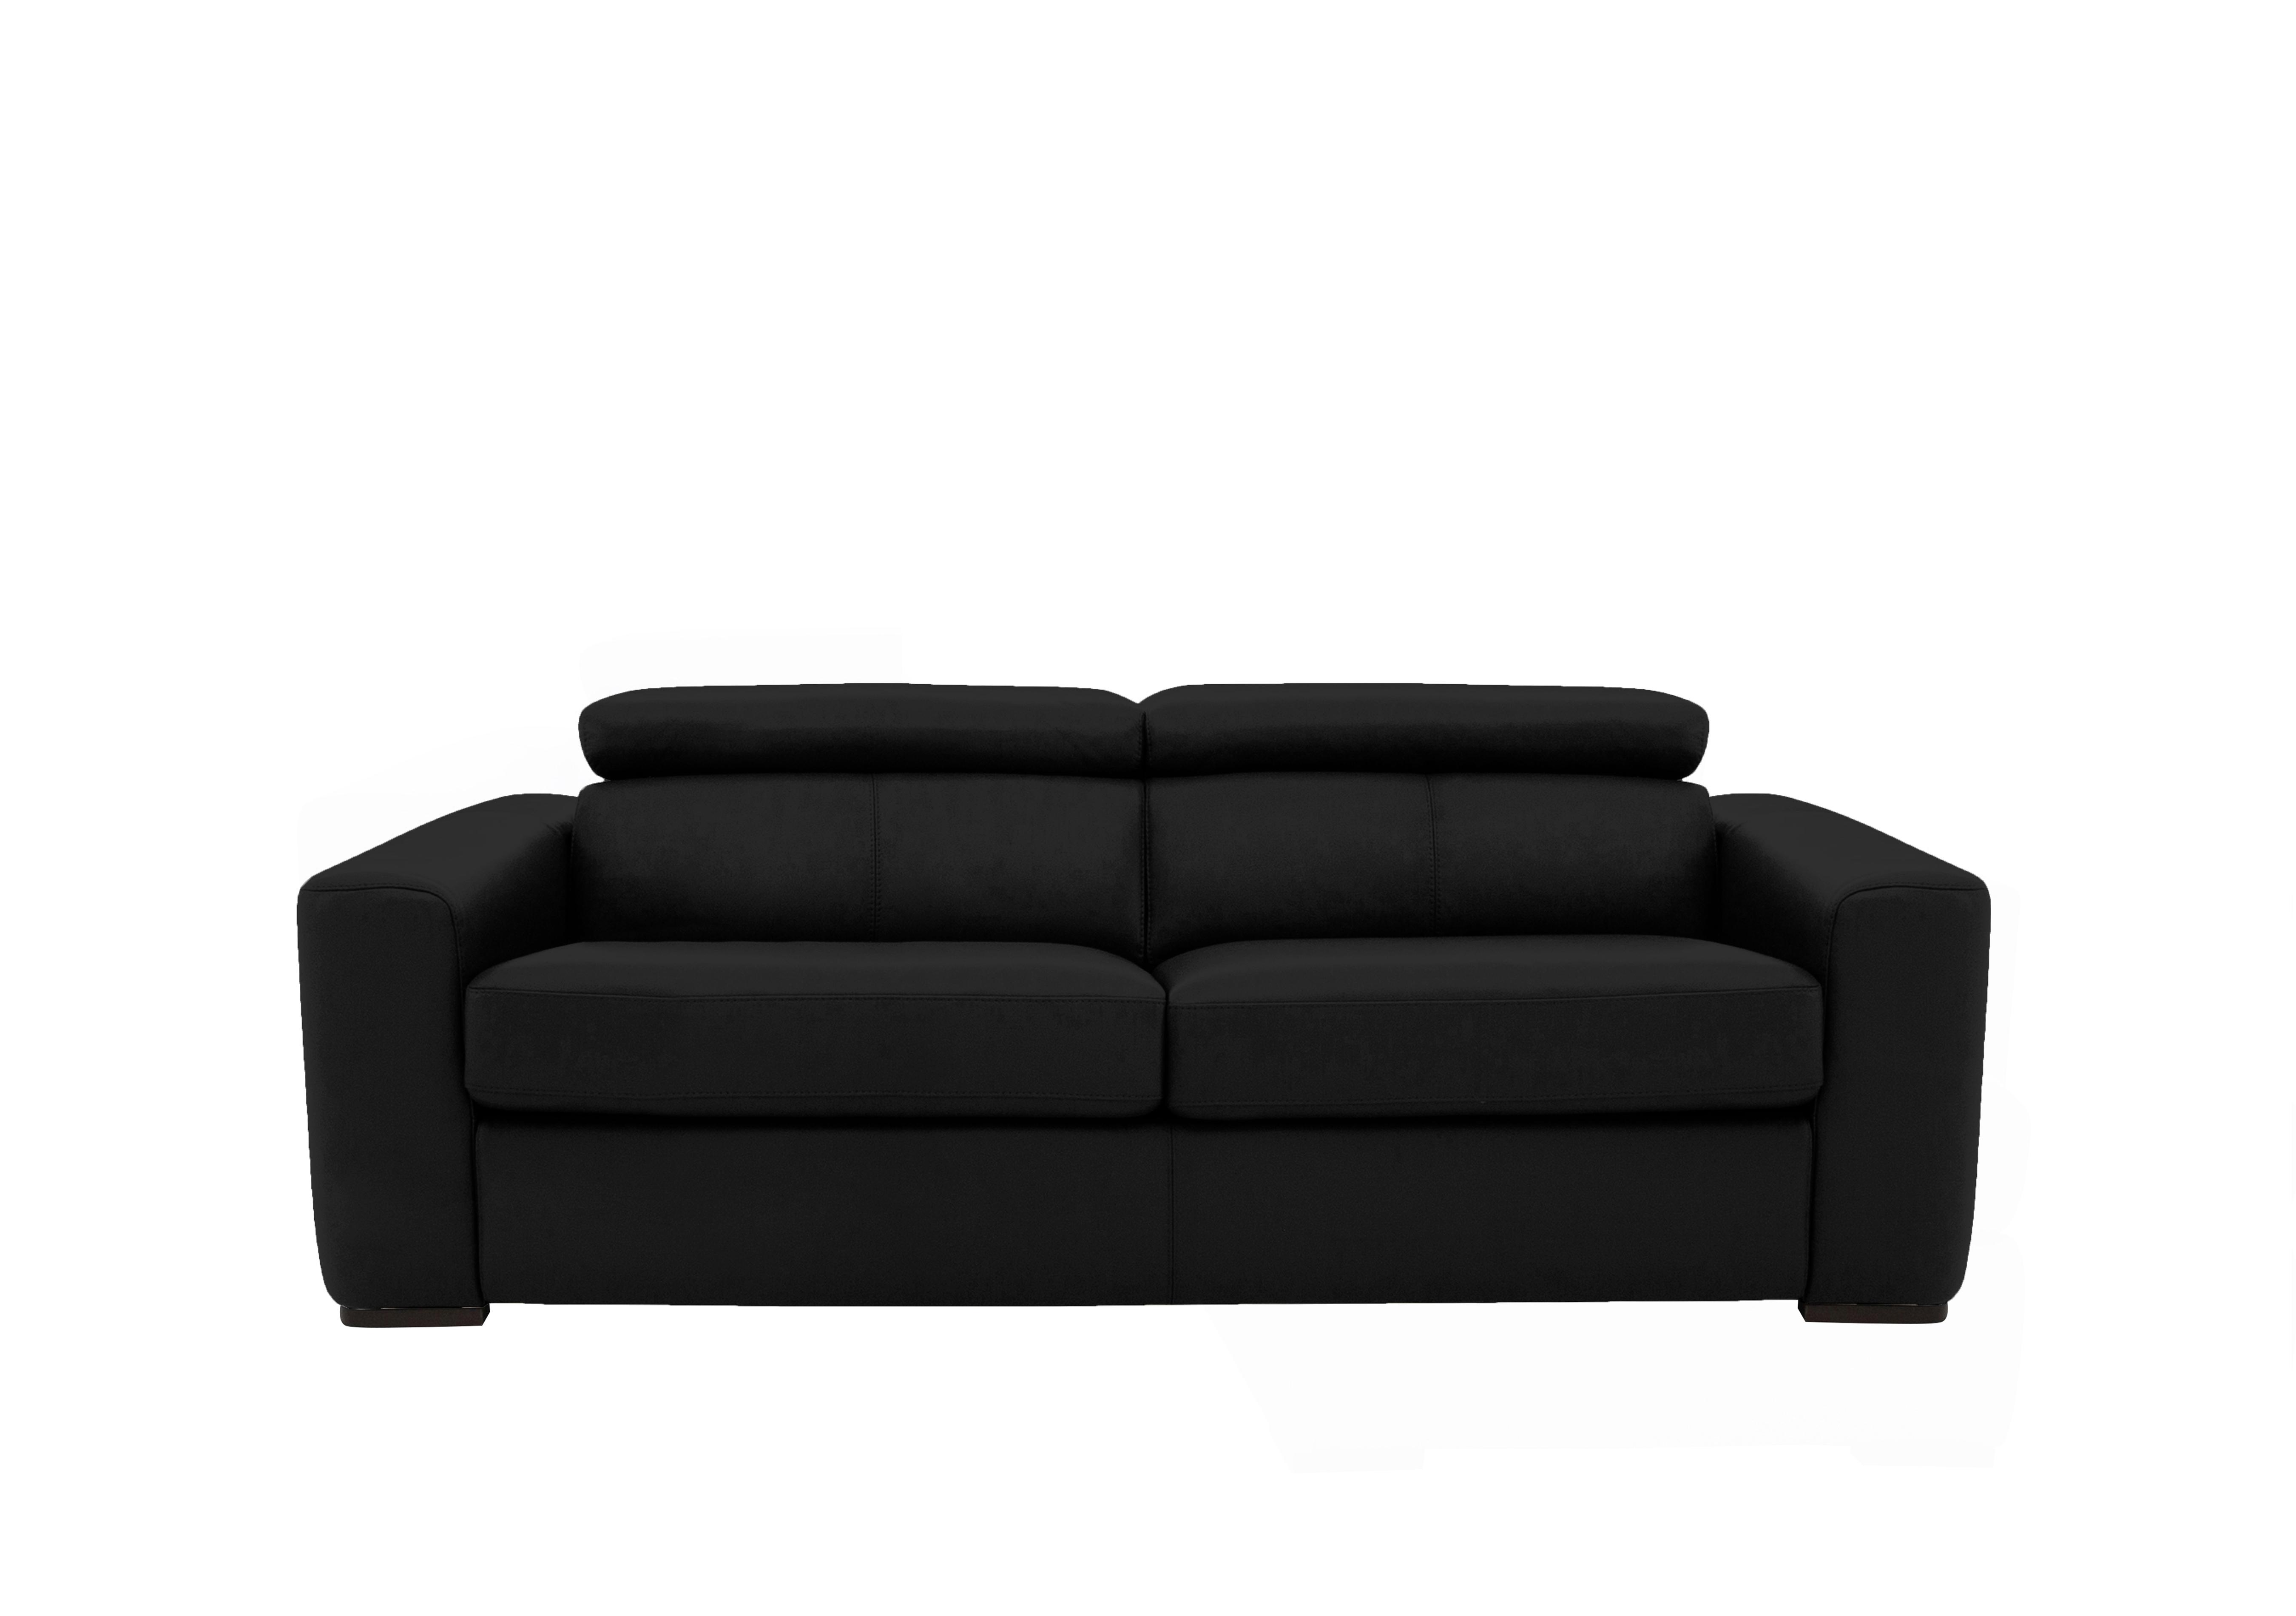 Infinity 3 Seater Leather Sofa in Bv-3500 Classic Black on Furniture Village